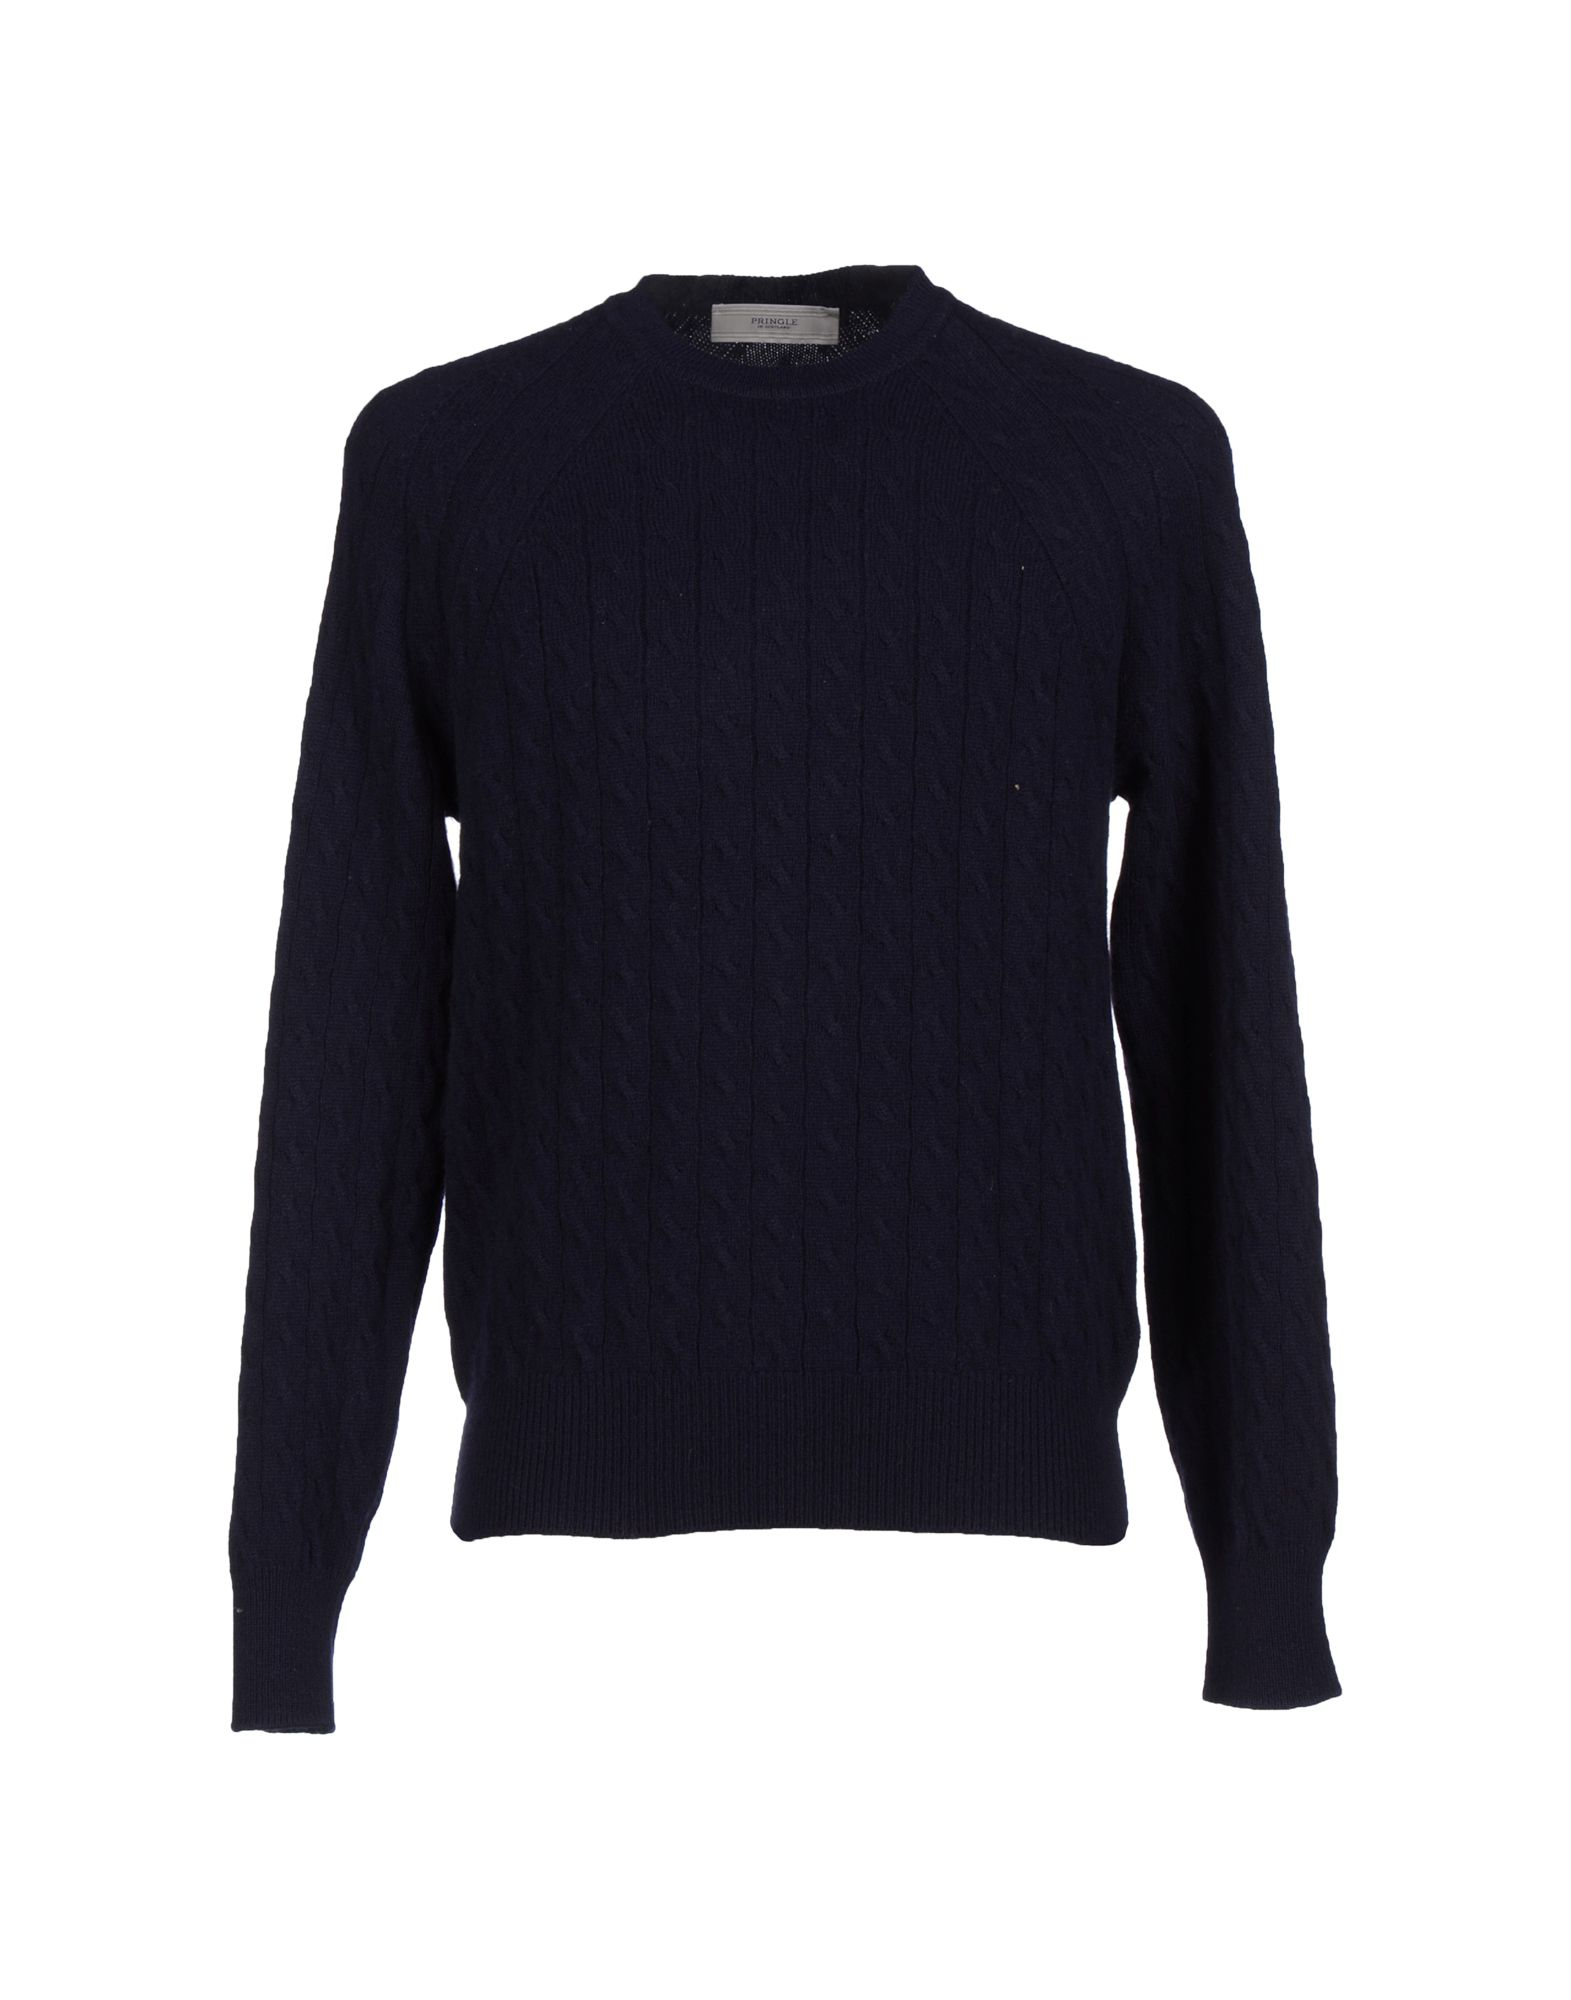 Lyst - Pringle Of Scotland Sweater in Blue for Men